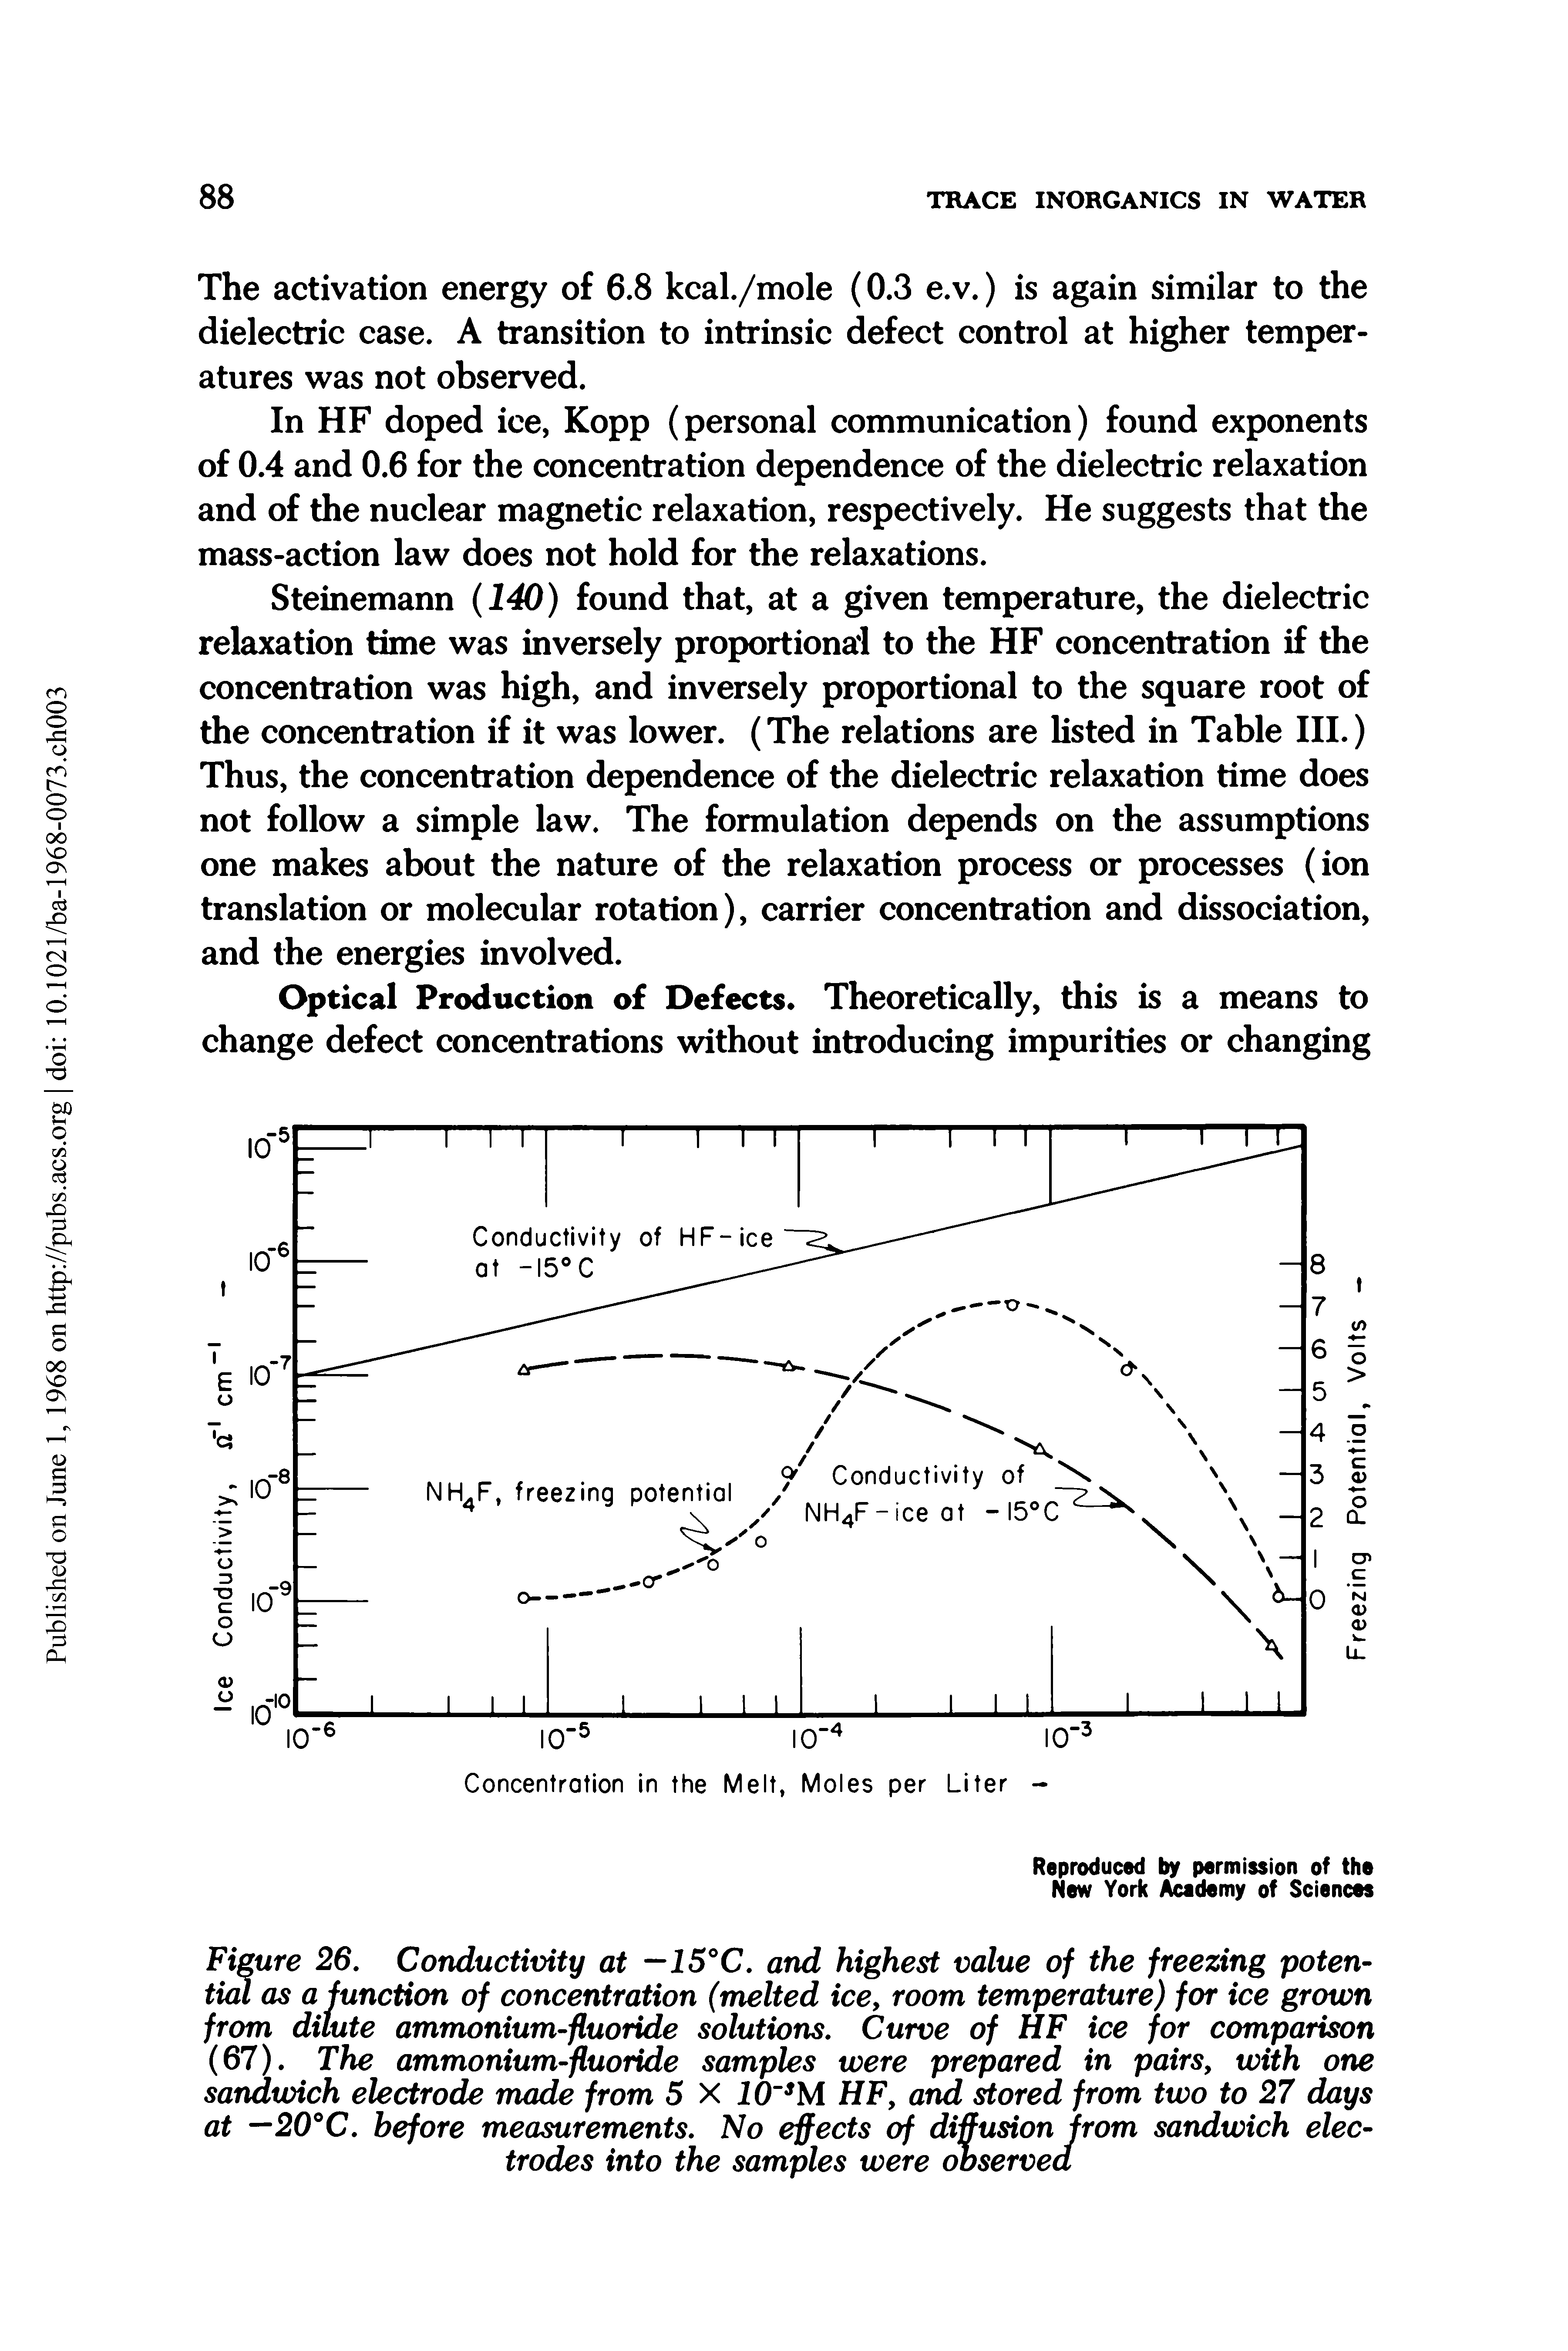 Figure 26. Conductivity at —15°C. and highest value of the freezing potential as a function of concentration (melted ice, room temperature) for ice grown from dilute ammonium-fluoride solutions. Curve of HF ice for comparison (67). The ammonium-fluoride samples were prepared in pairs, with one sandwich electrode made from 5 X 10 M HF, and stored from two to 27 days at —20 C. before measurements. No effects of diffusion from sandwich electrodes into the samples were observed...